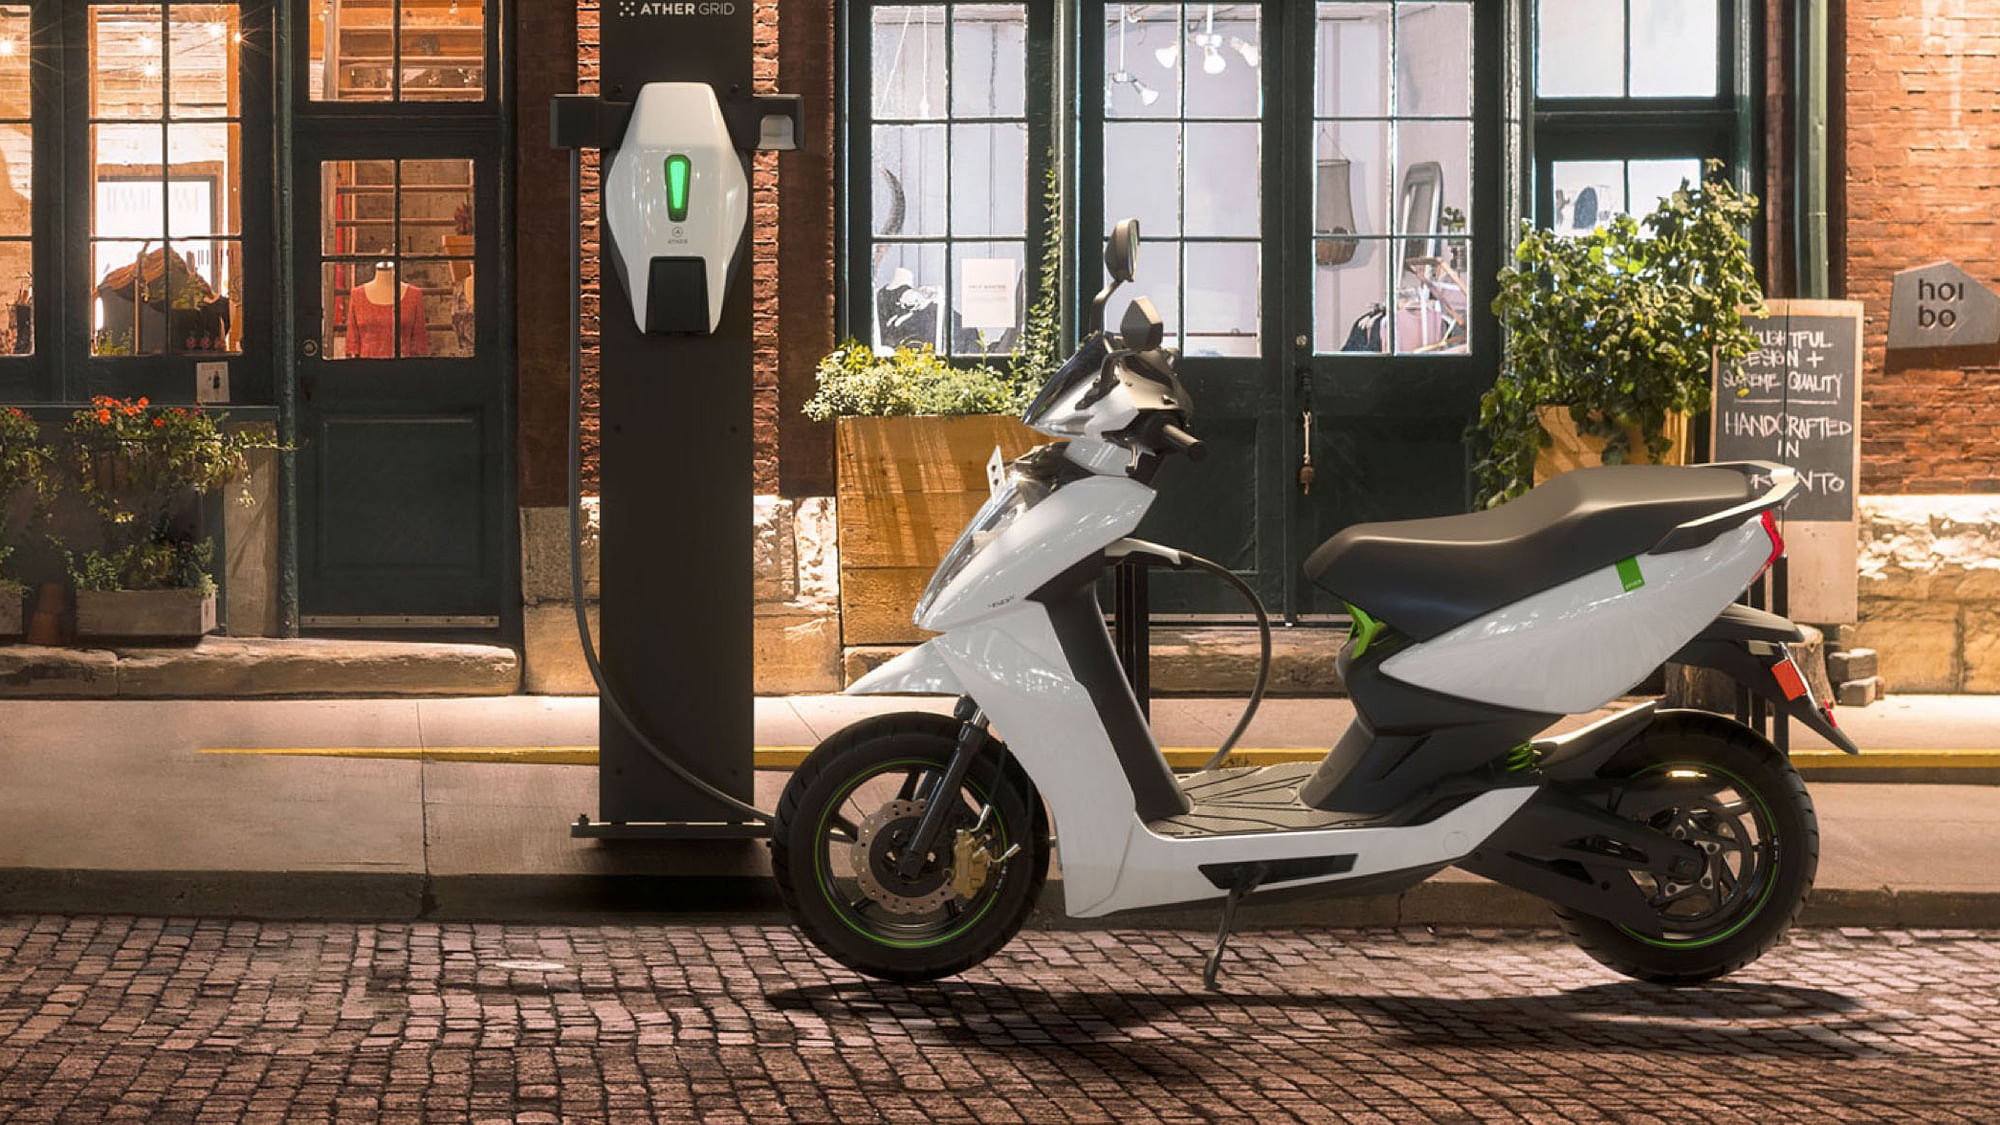 Ather 450x Launched in India Price, Specifications, Details, Images